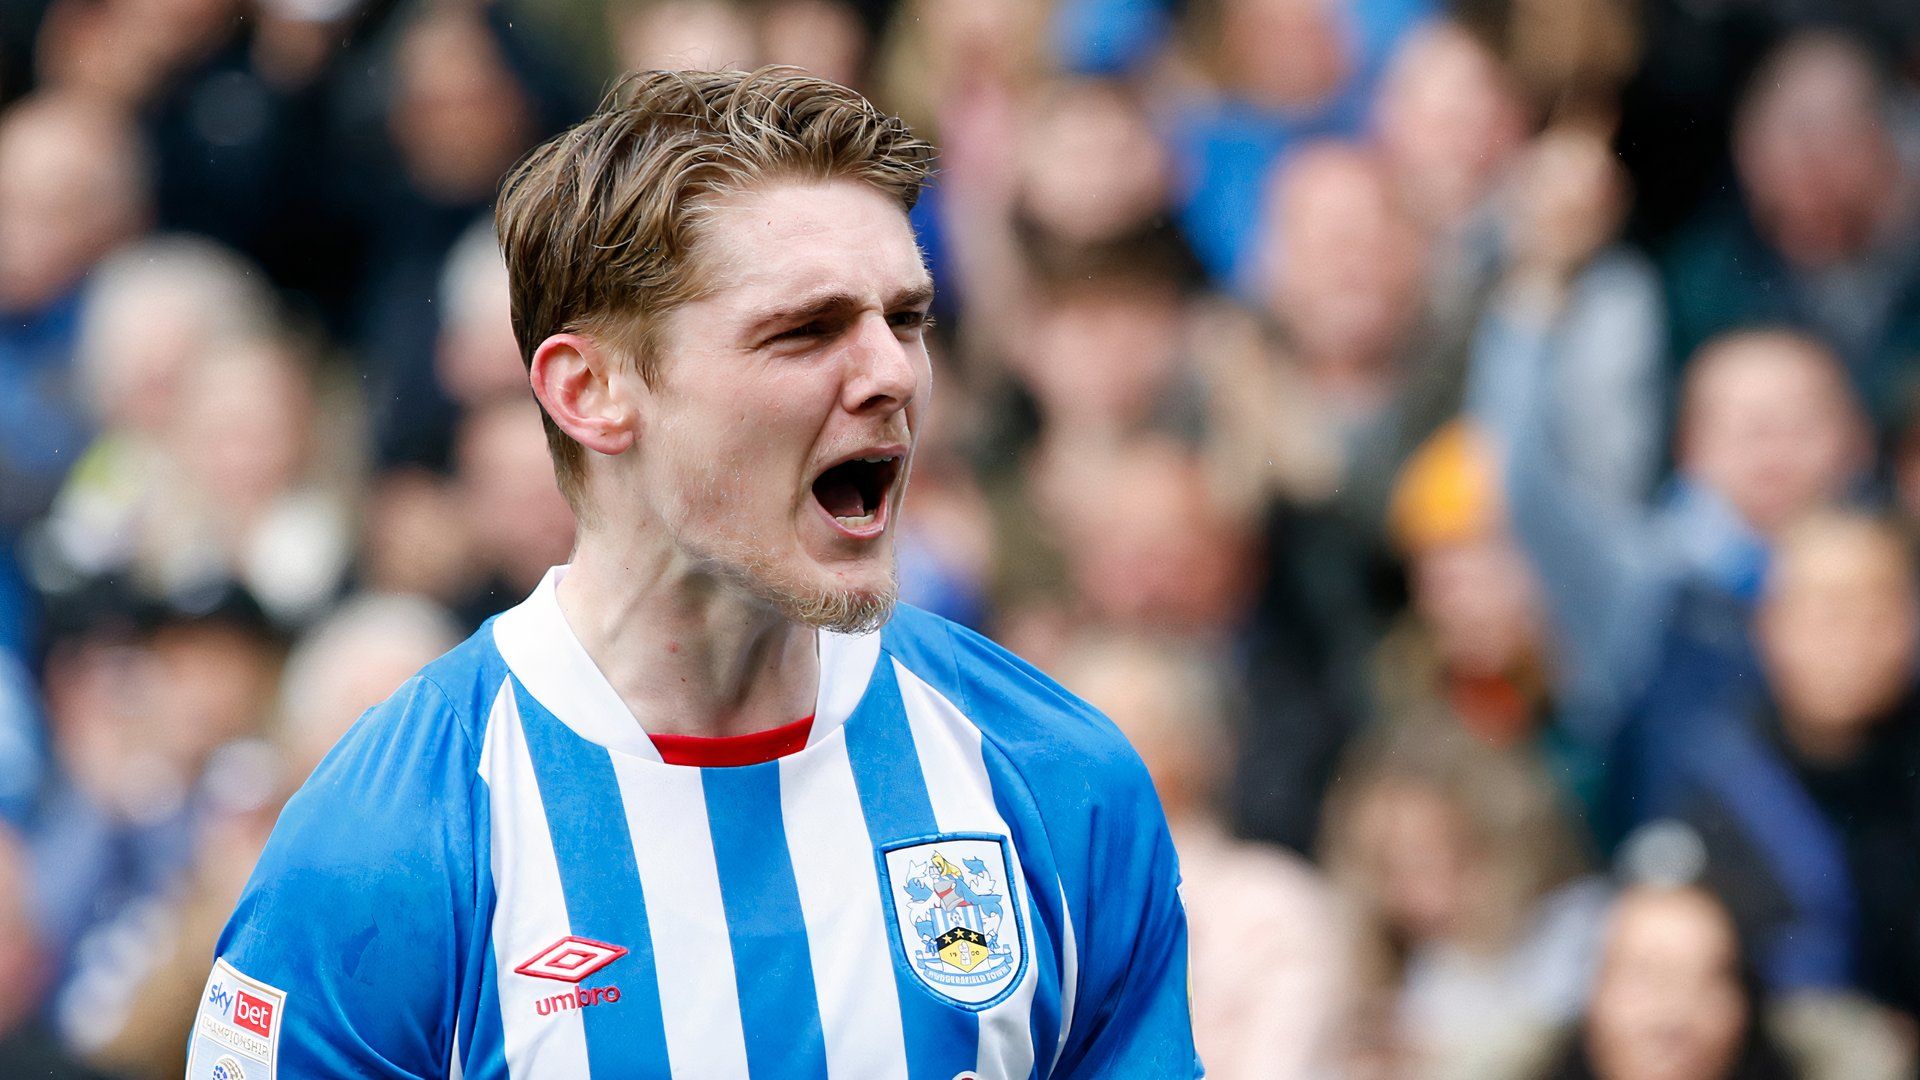 Coventry City "buying potential" with Huddersfield Town's Jack Rudoni